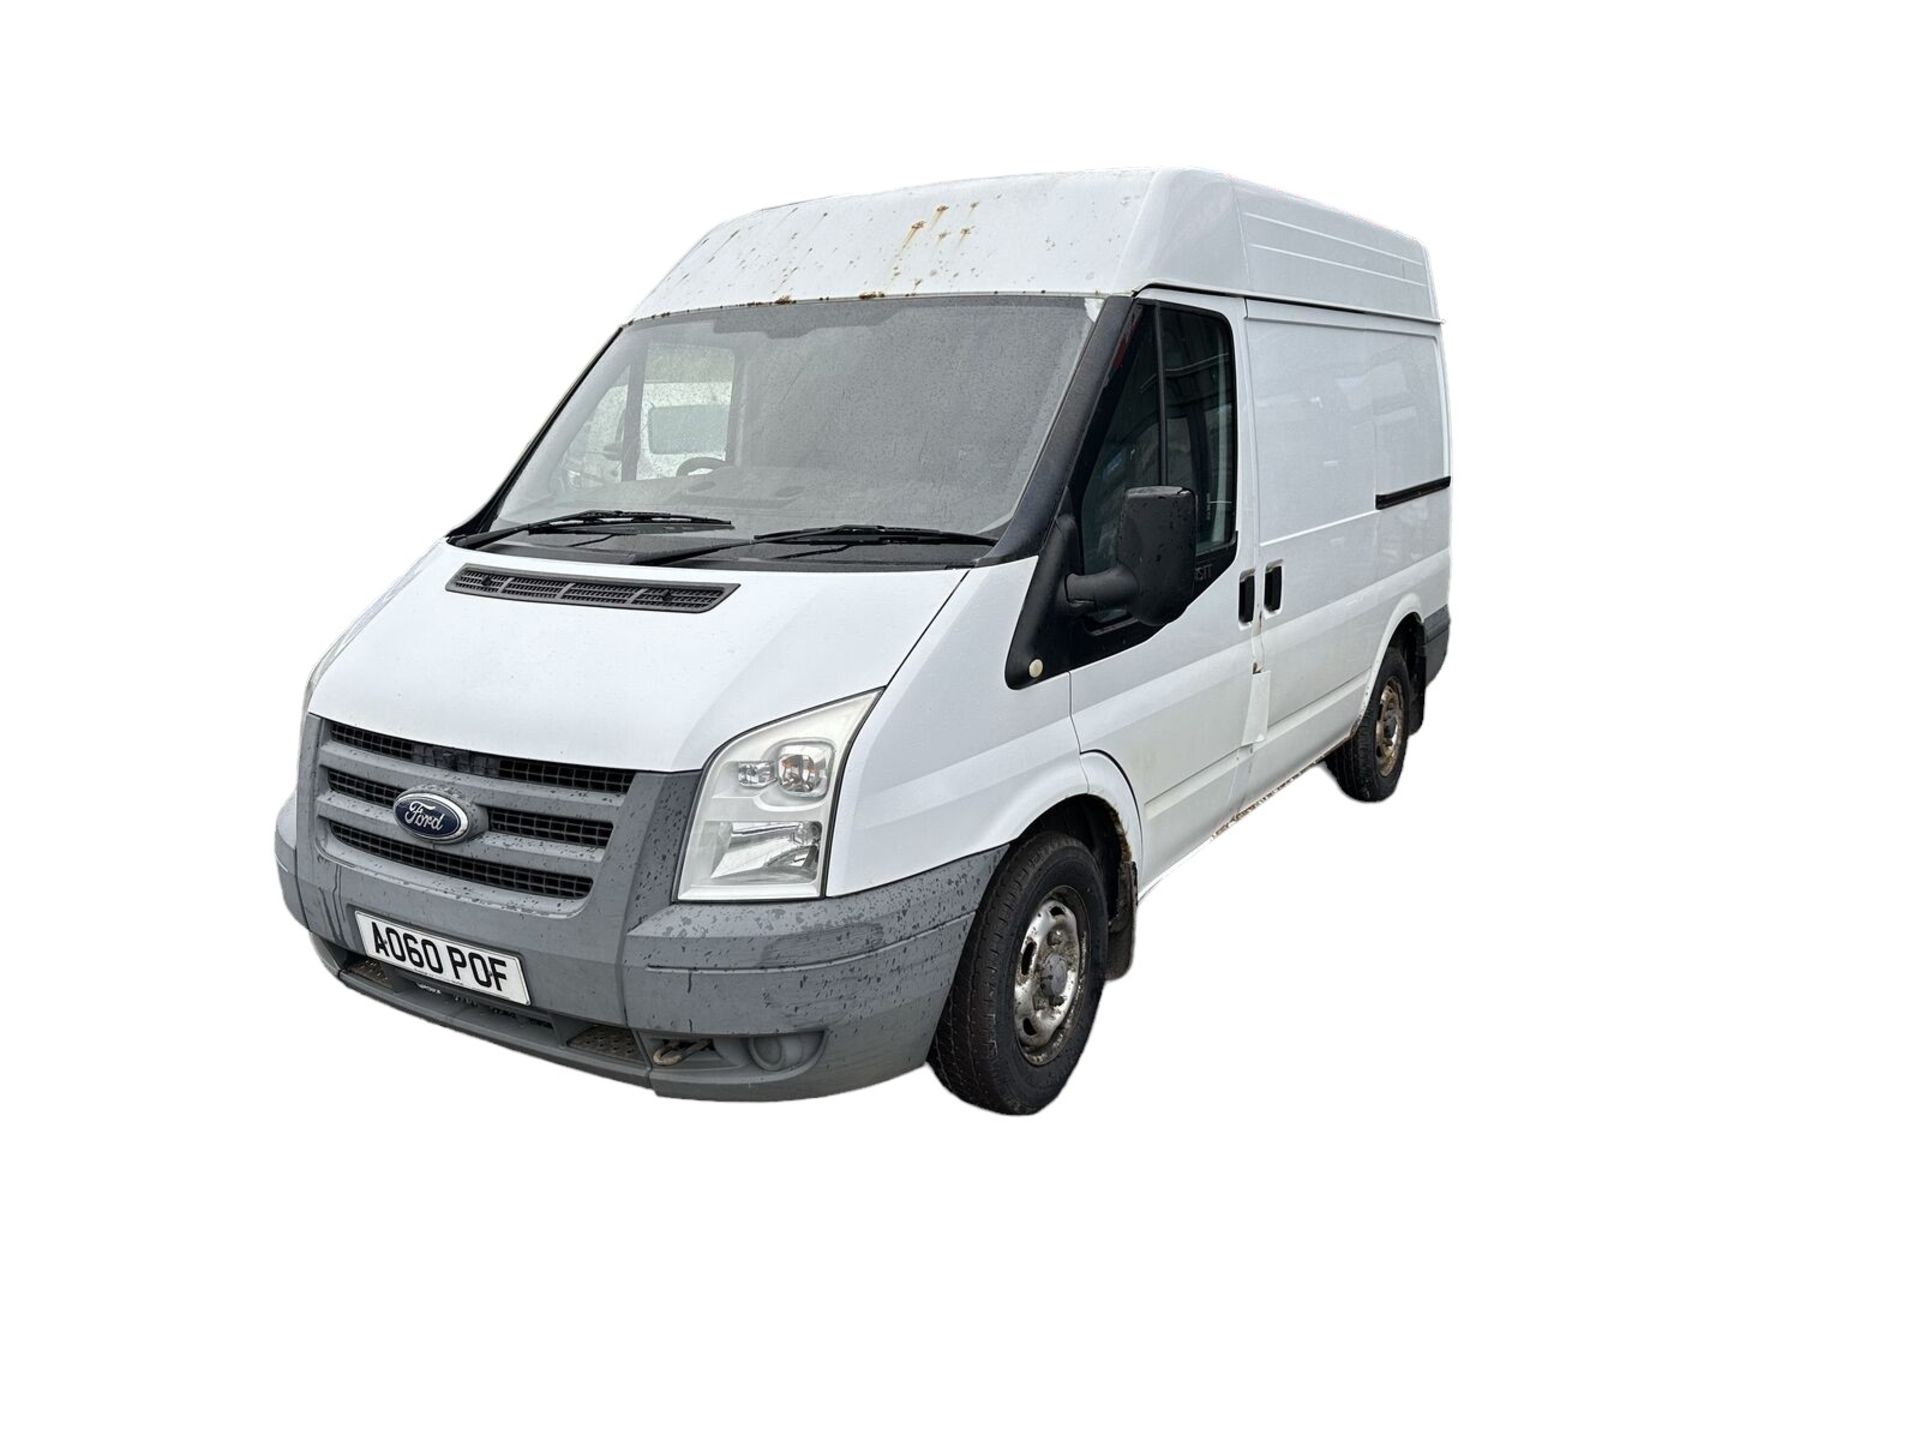 RELIABLE WORKHORSE: 60 PLATE FORD TRANSIT 260, MEDIUM ROOF, READY TO TACKLE TASKS